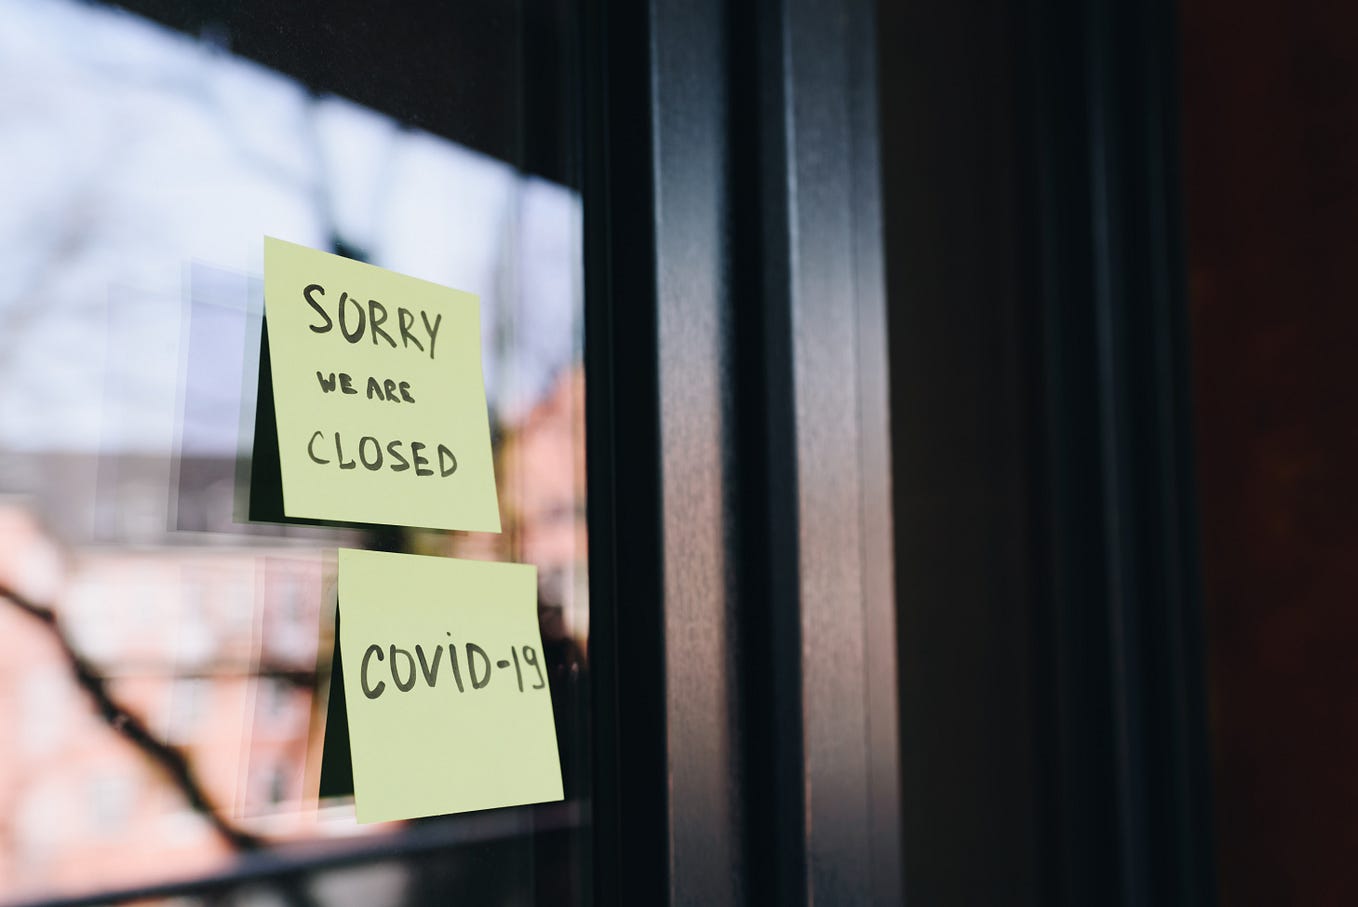 Sign on business door: Sorry we are closed, COVID-19